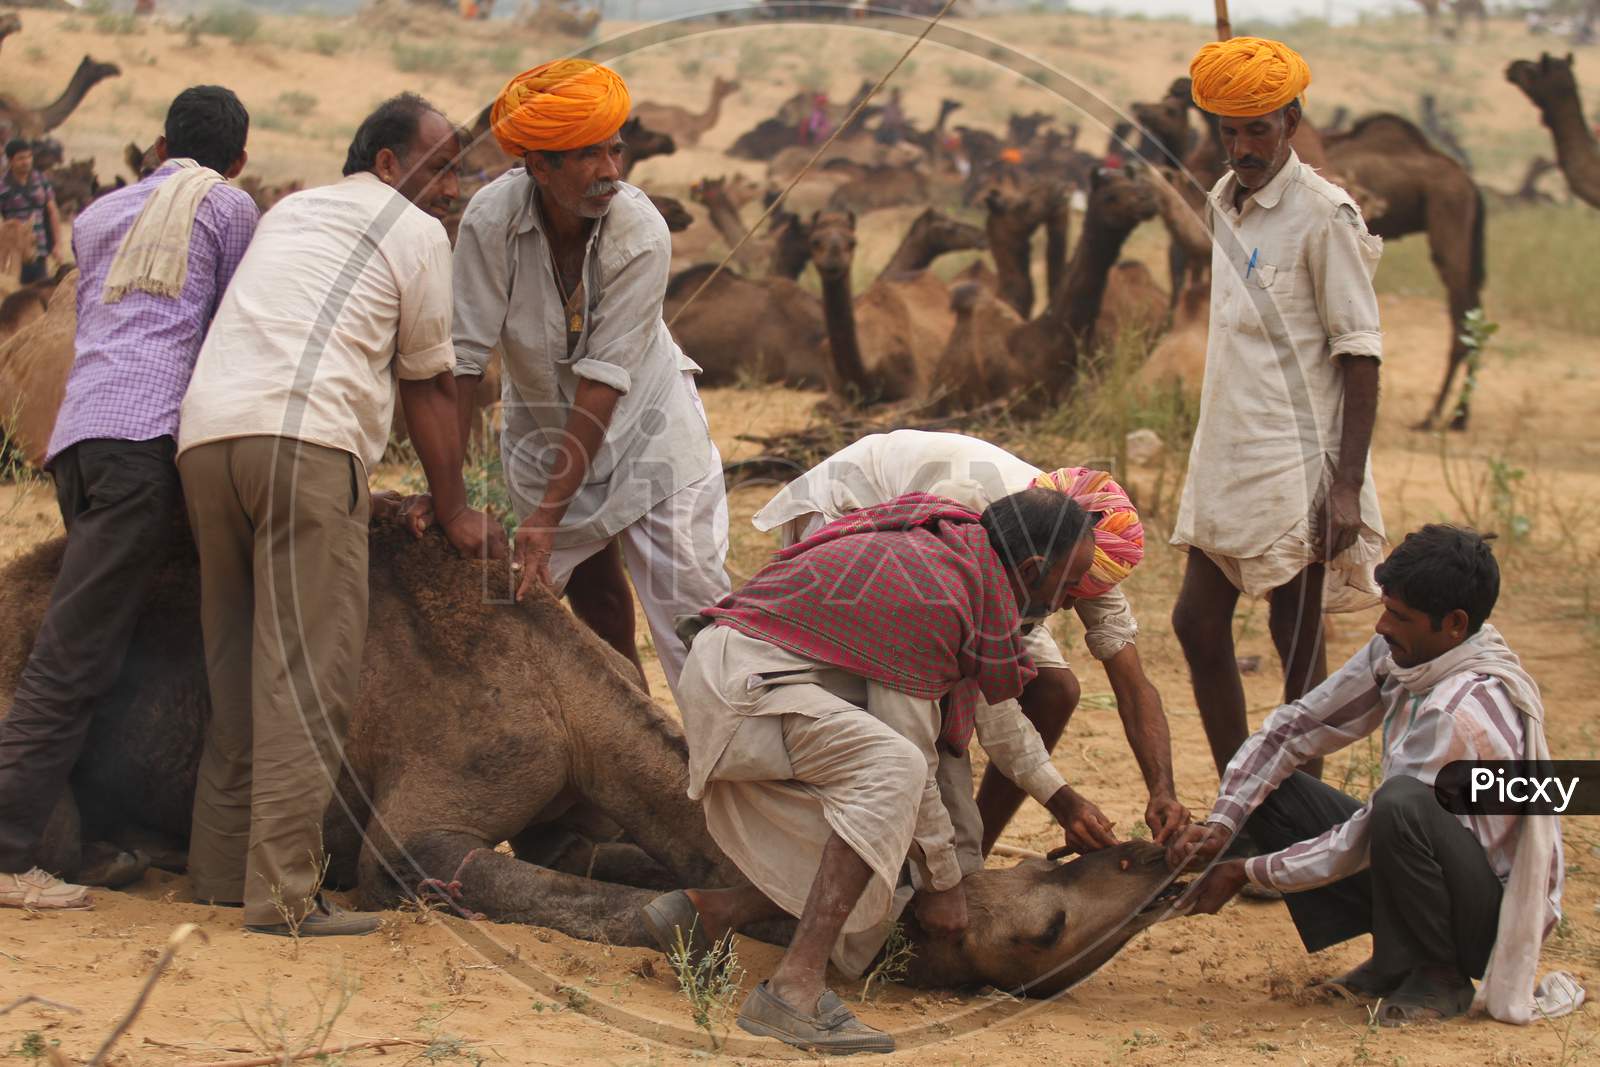 Pushkar Camel Fair In Pushkar In Rajasthan. Thousands Of Livestock Traders From The Region Come To The Traditional Camel Fair Where Livestock, Mainly Camels, Are Traded. This Annual Five-Day Camel And Livestock Fair Is One Of The World'S Largest Camel Fairs.